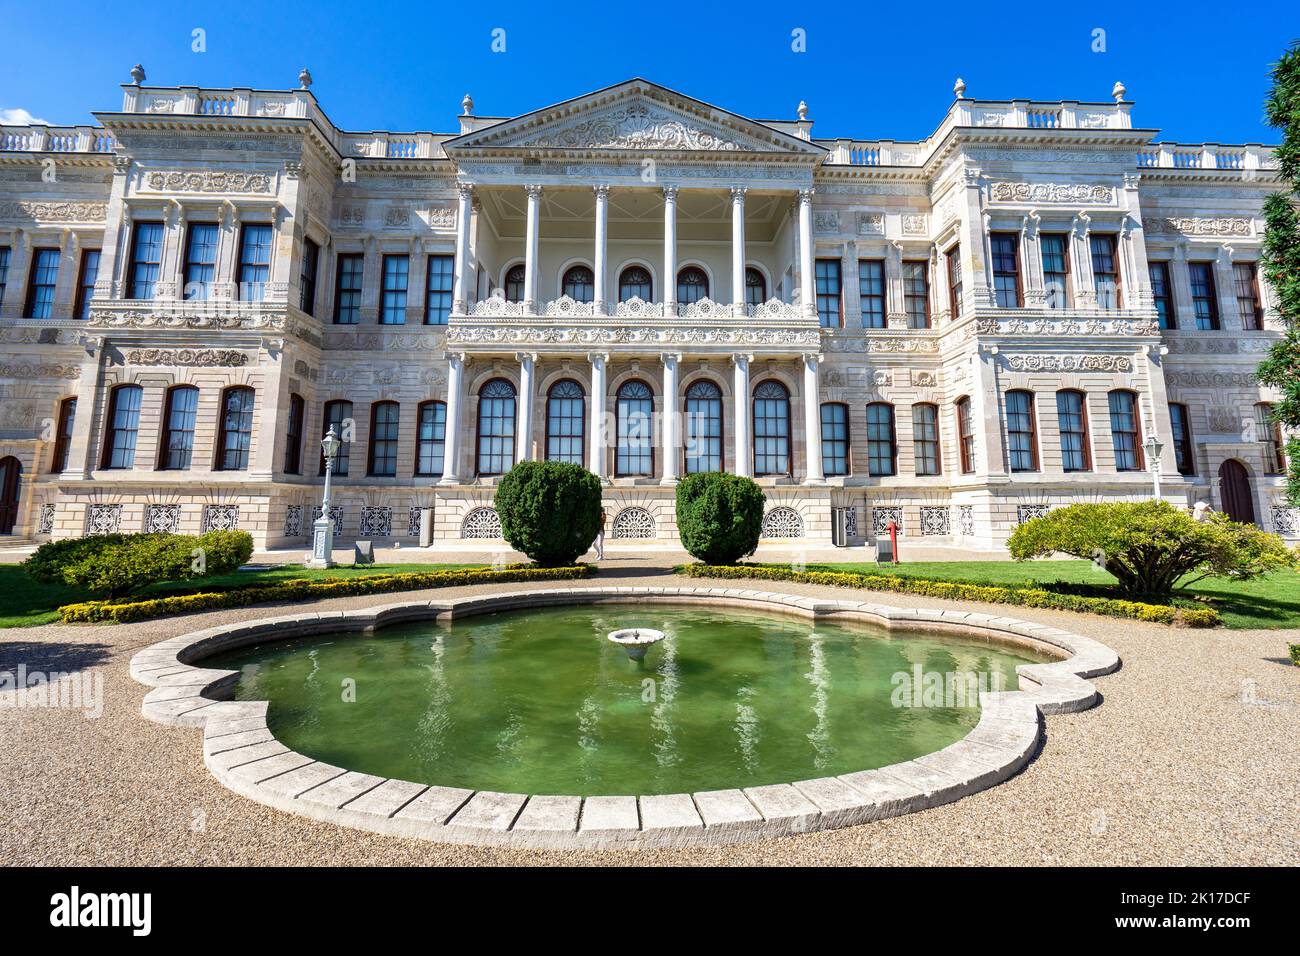 Exterior view of National Palaces Painting Museum at Dolmabahce Palace. Dolmabahce is the largest palace in Istanbul, Turkey. Stock Photo